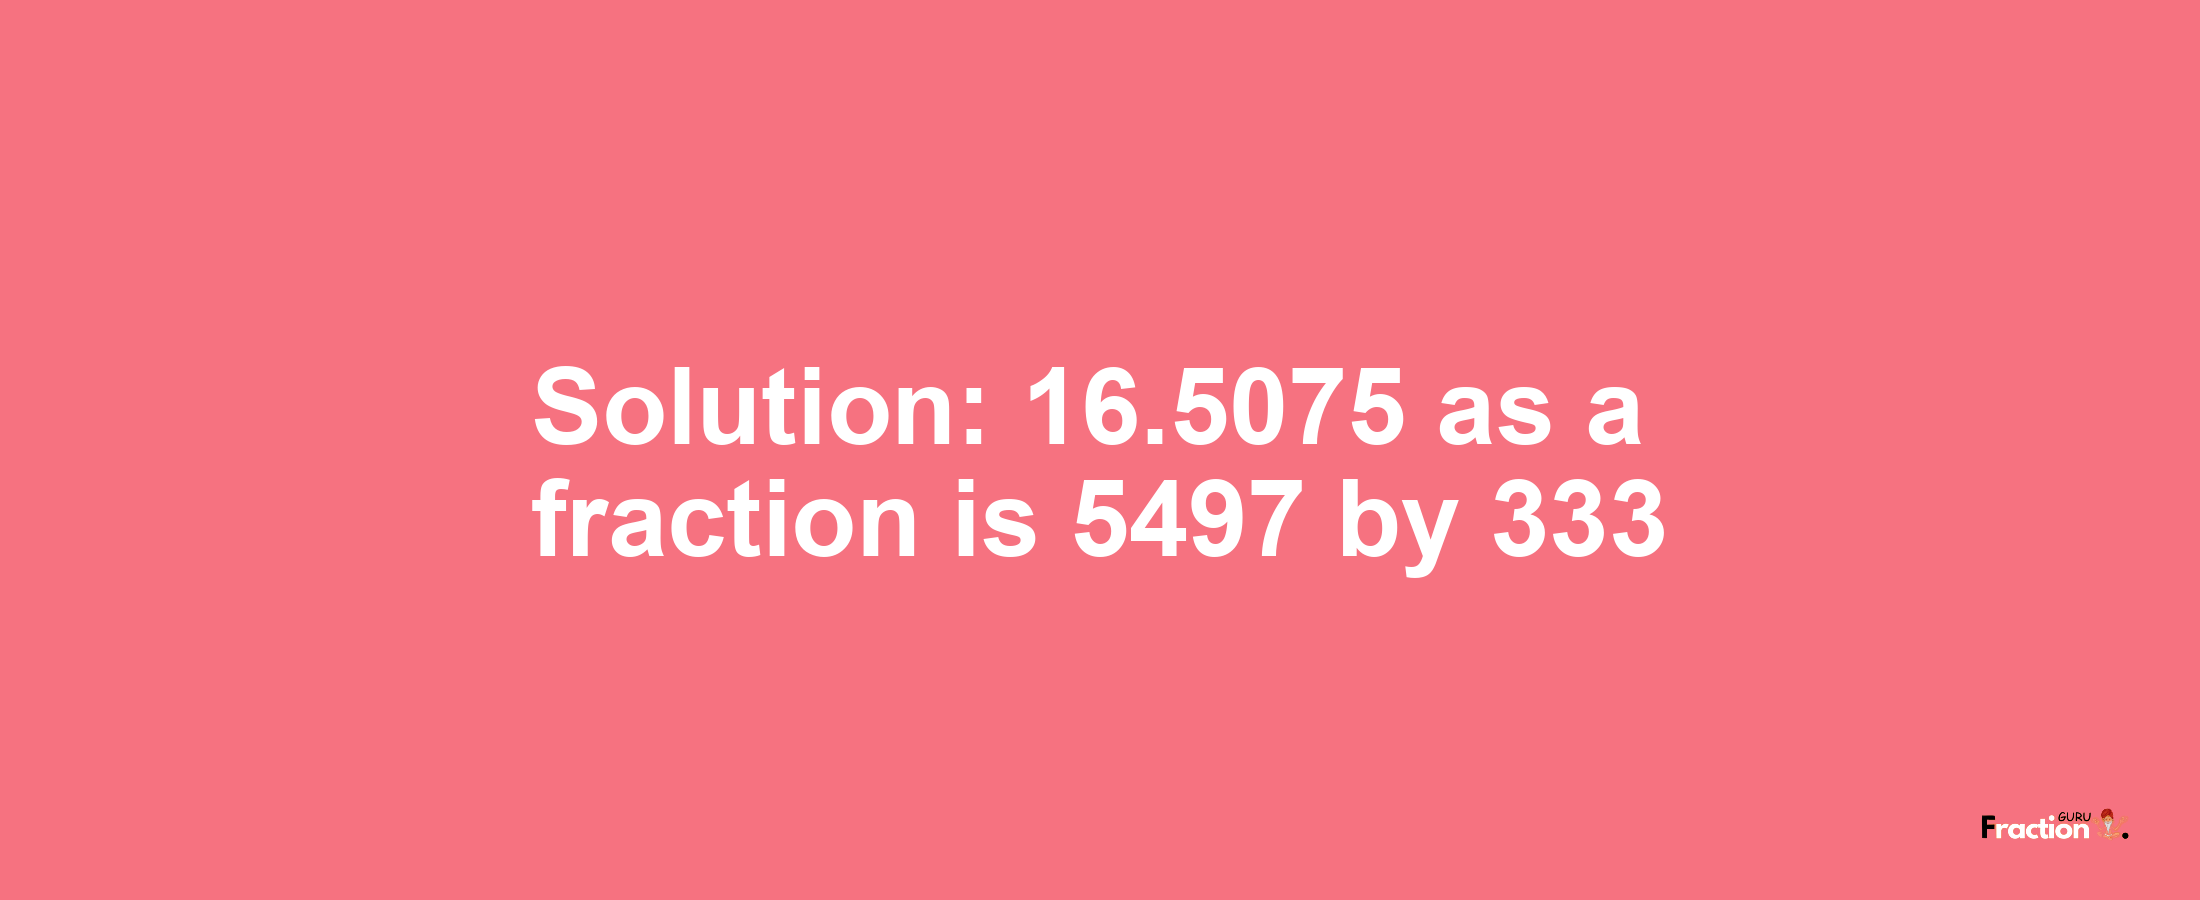 Solution:16.5075 as a fraction is 5497/333